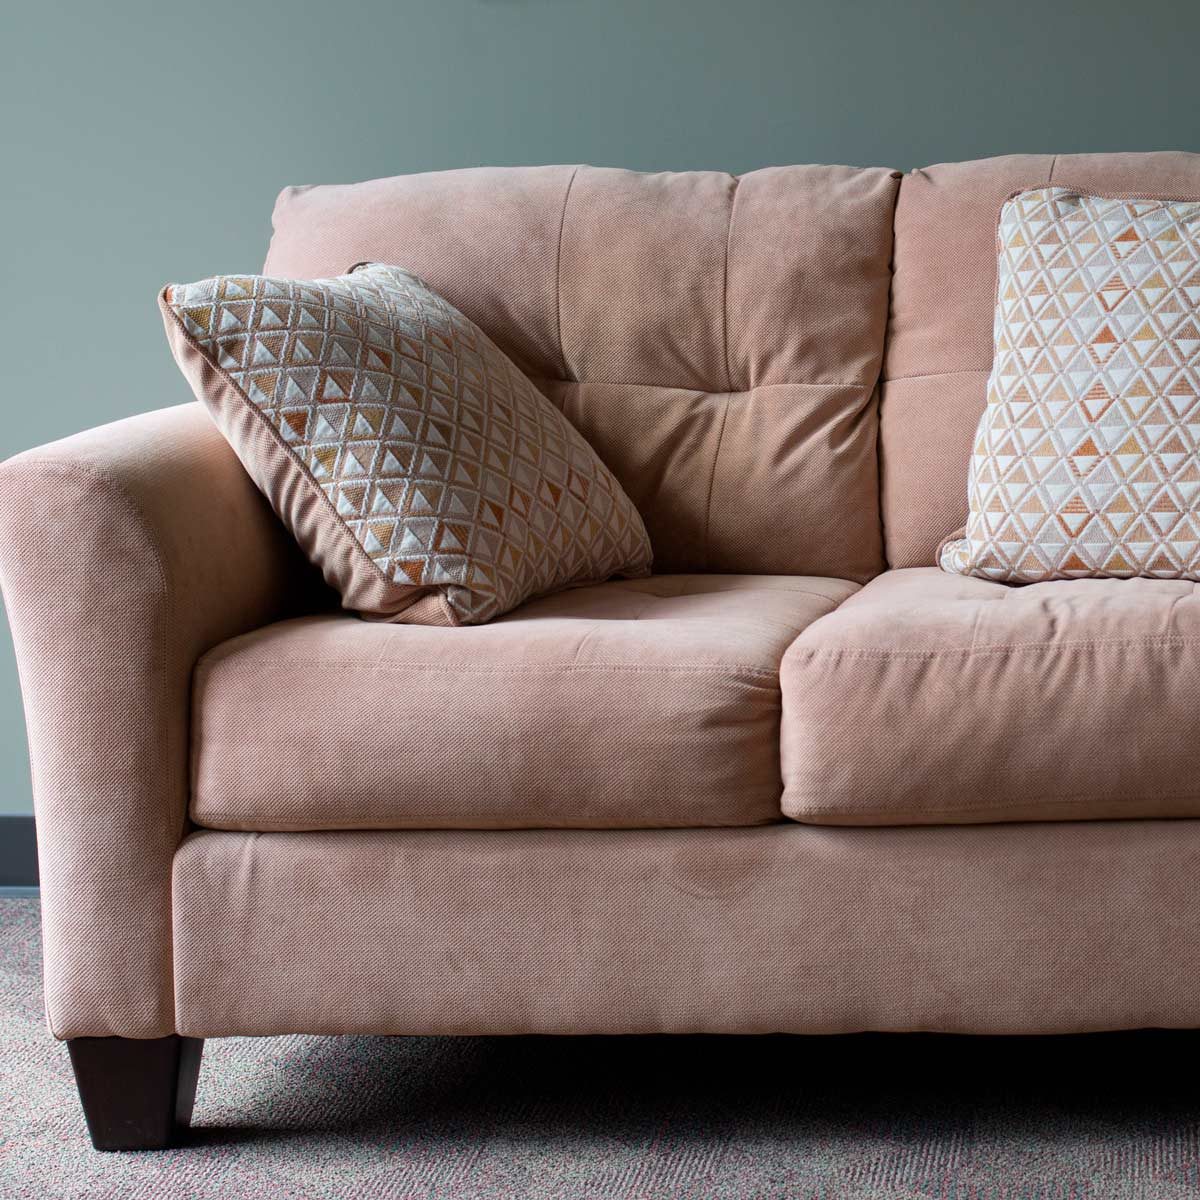 Tuesday Tip - Cleaning Microfiber Couches, Home Maid Simple